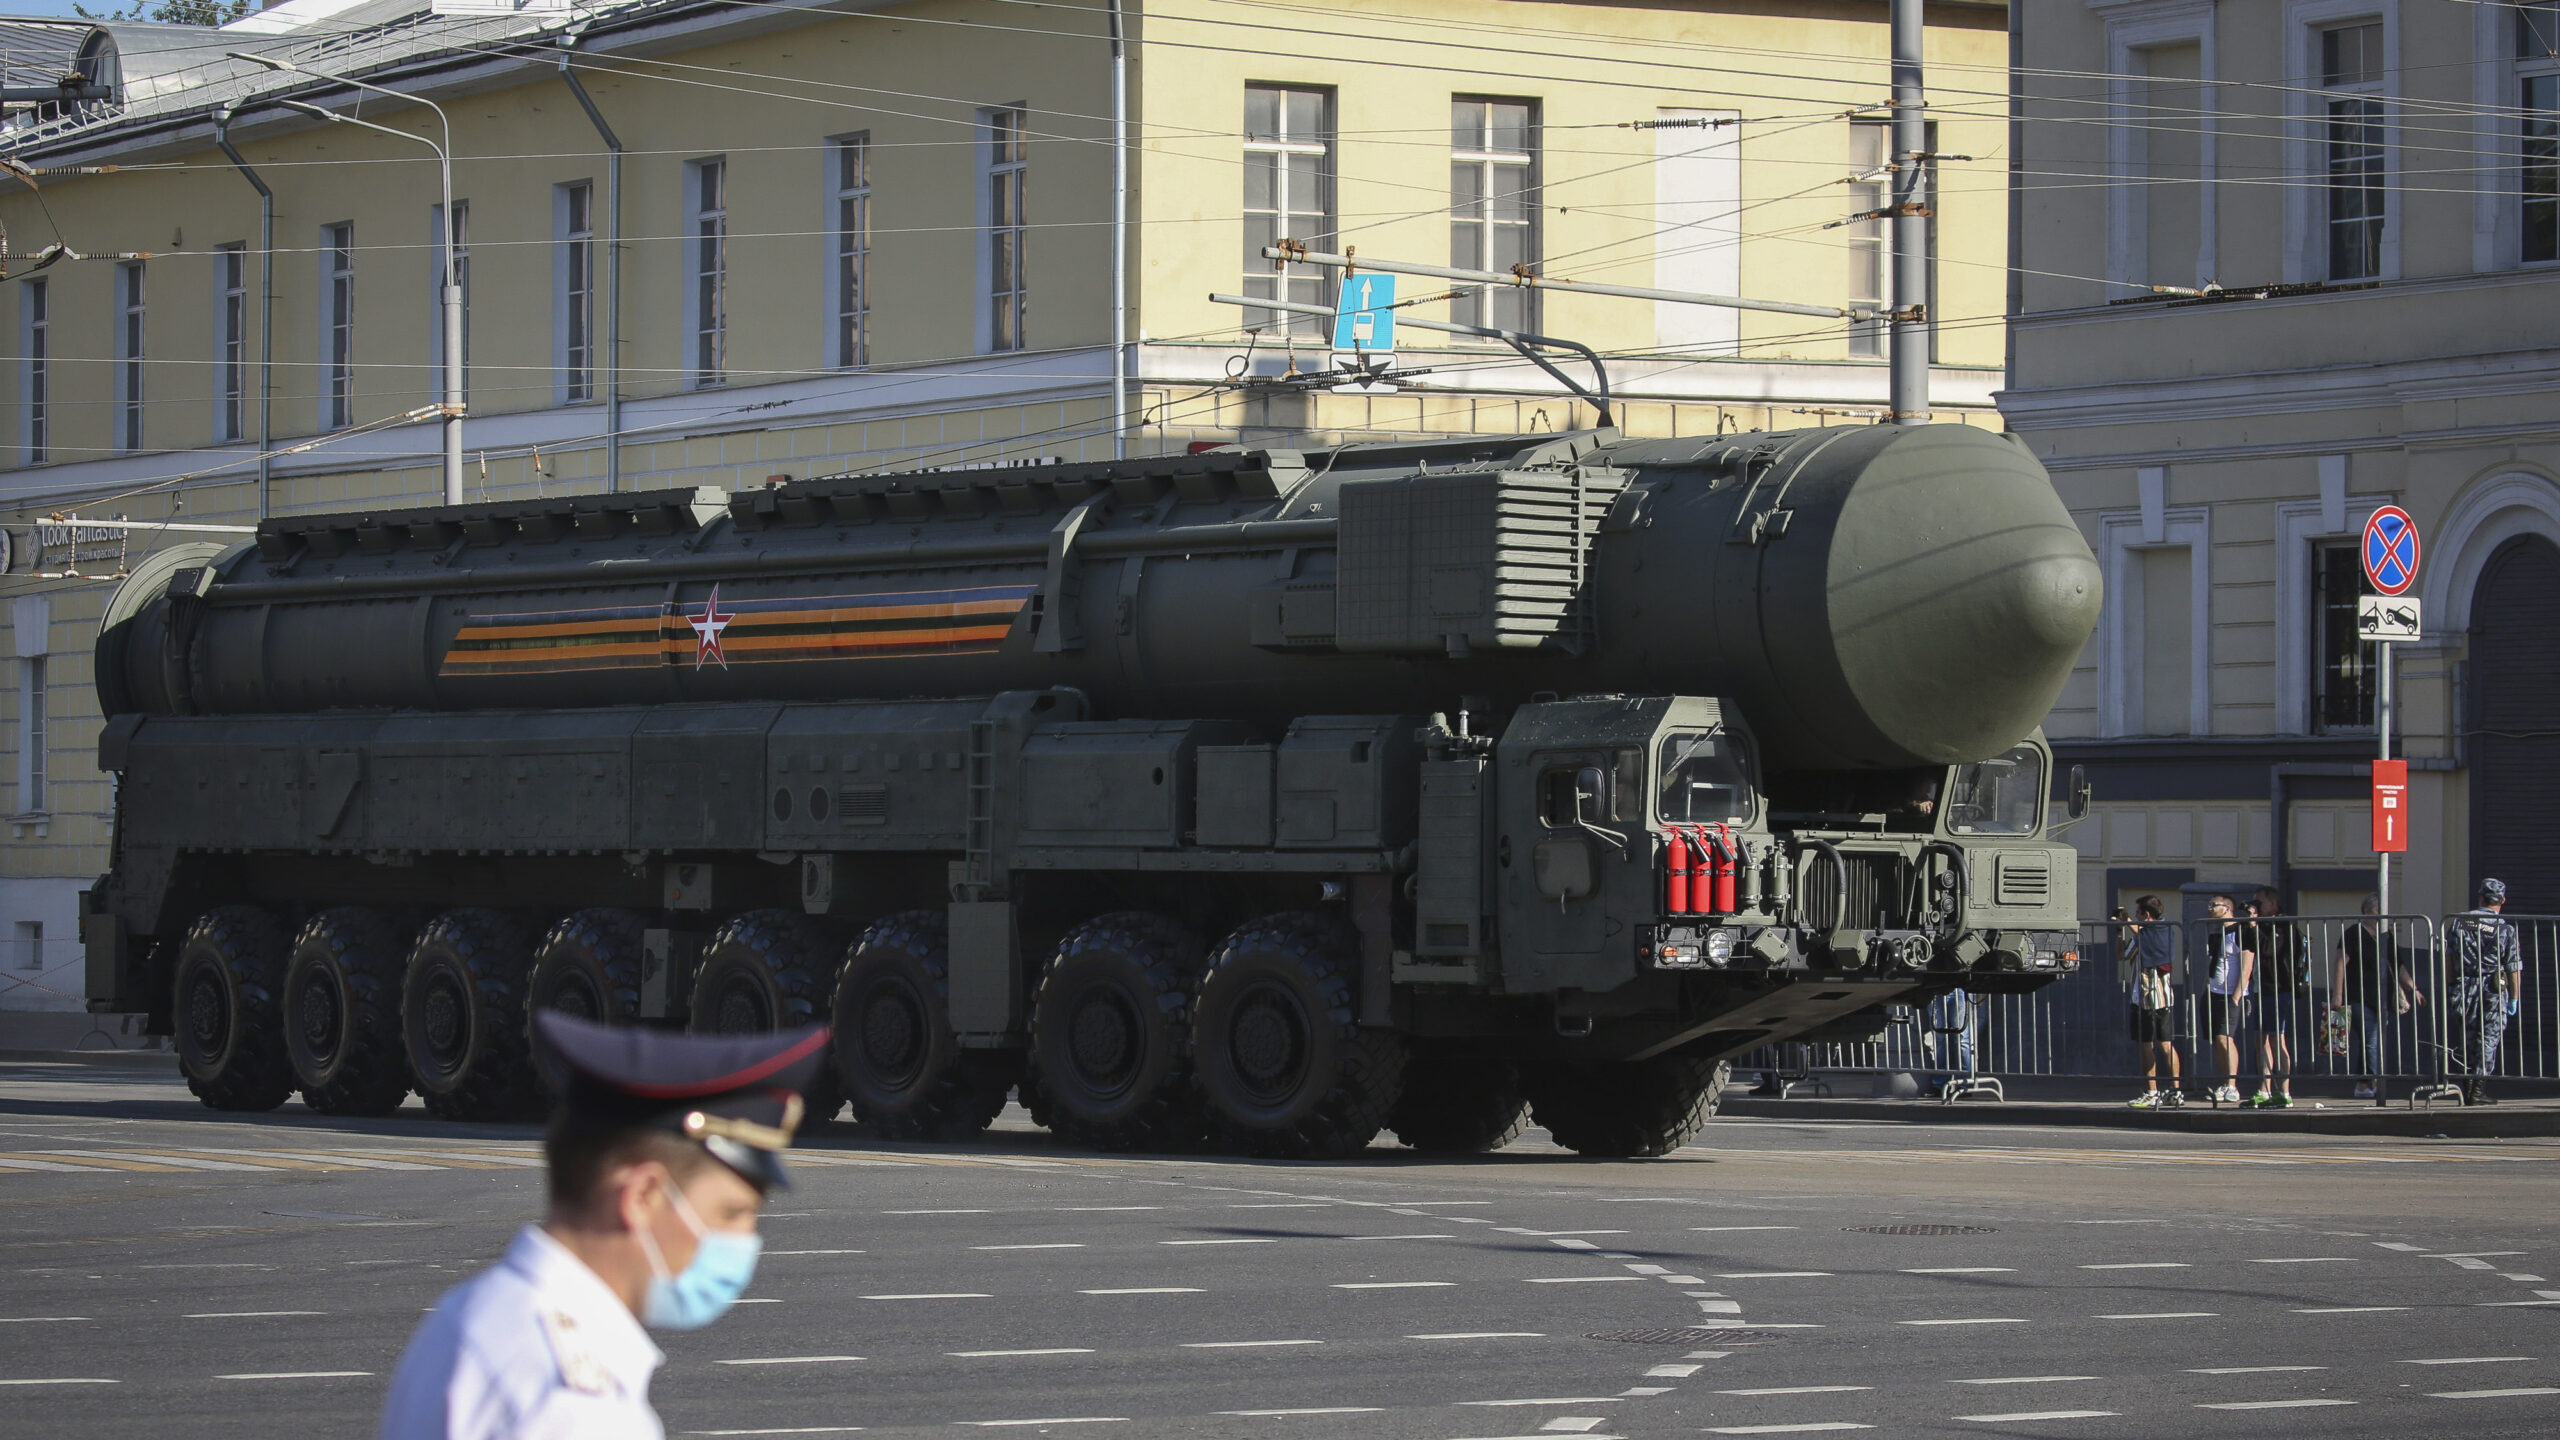 How Russia’s nuclear double cross of Ukraine teaches dangerous lessons